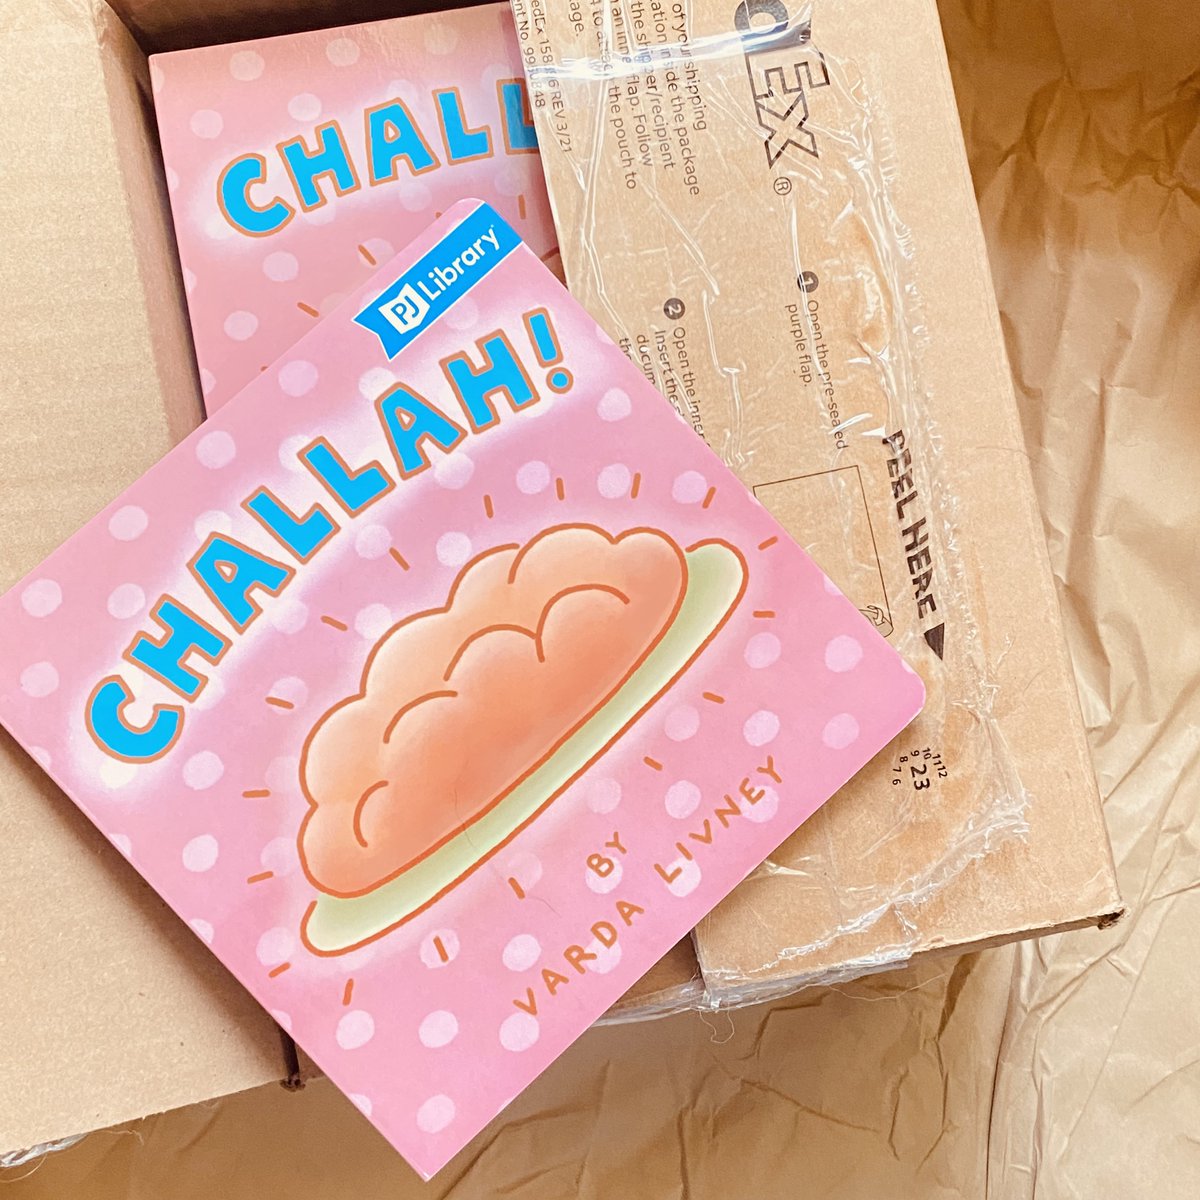 The 'Challah!' samples have arrived! And there are bunnies! Join @PJLibrary and just like that, it will arrive in your mailbox for free! Or buy on Amazon a.co/d/7pts4w7 . Shoutout to the #jewishboardbook gang @SarahAroeste
@nchurnin @JewishArtbyAnn 
@viviankirkfield